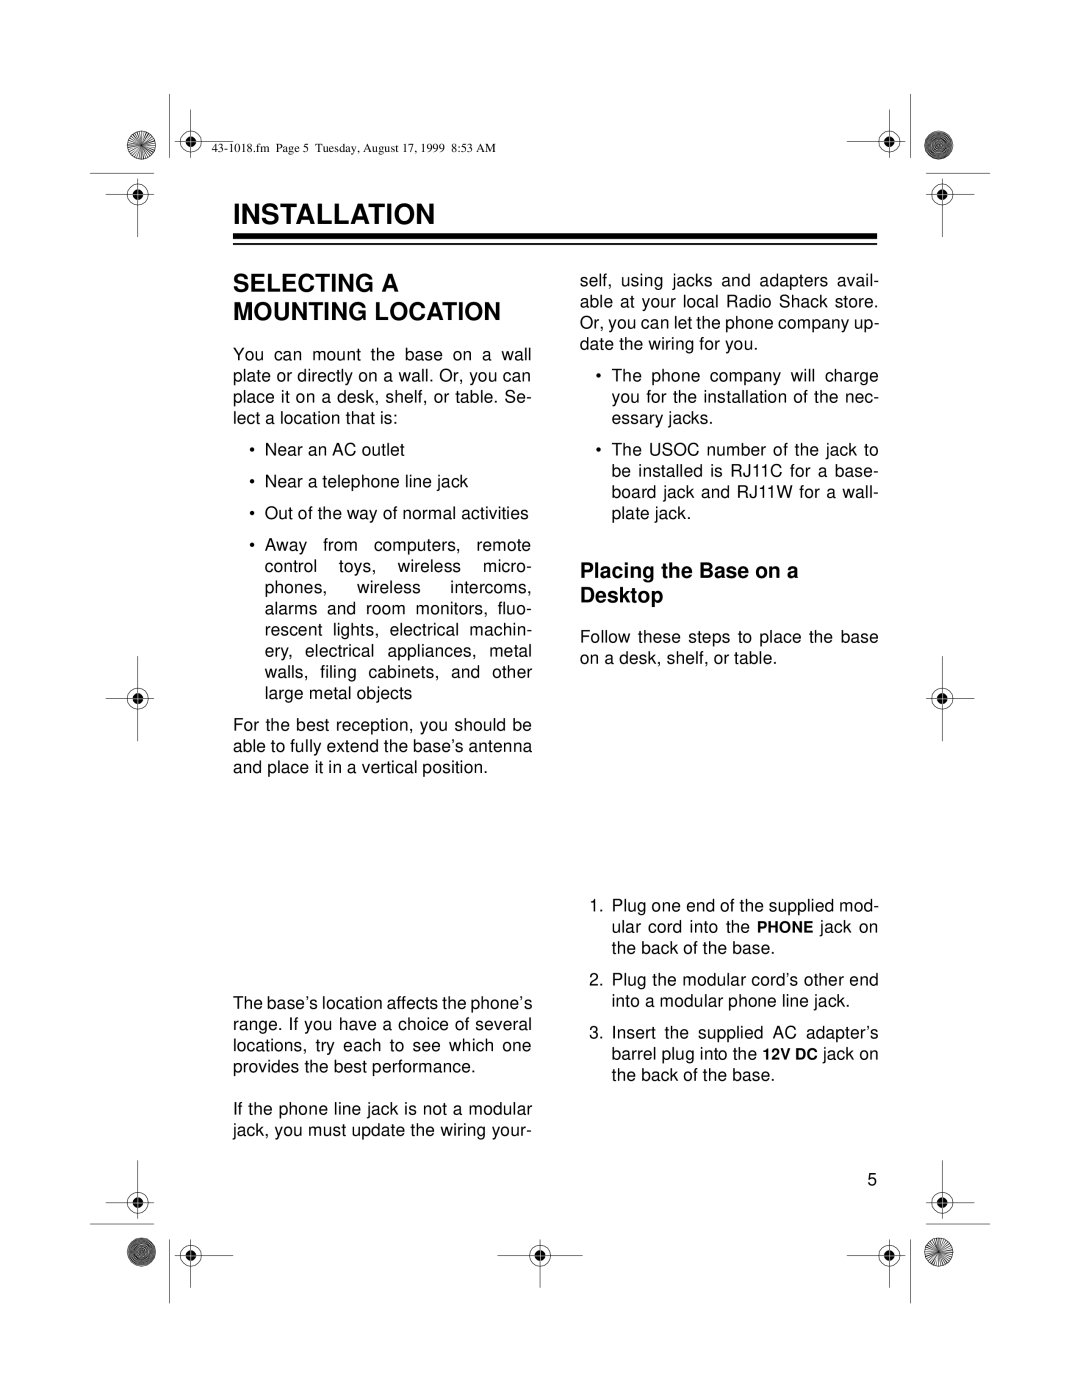 Radio Shack ET-518 owner manual Installation, Selecting A Mounting Location, Placing the Base on a Desktop 